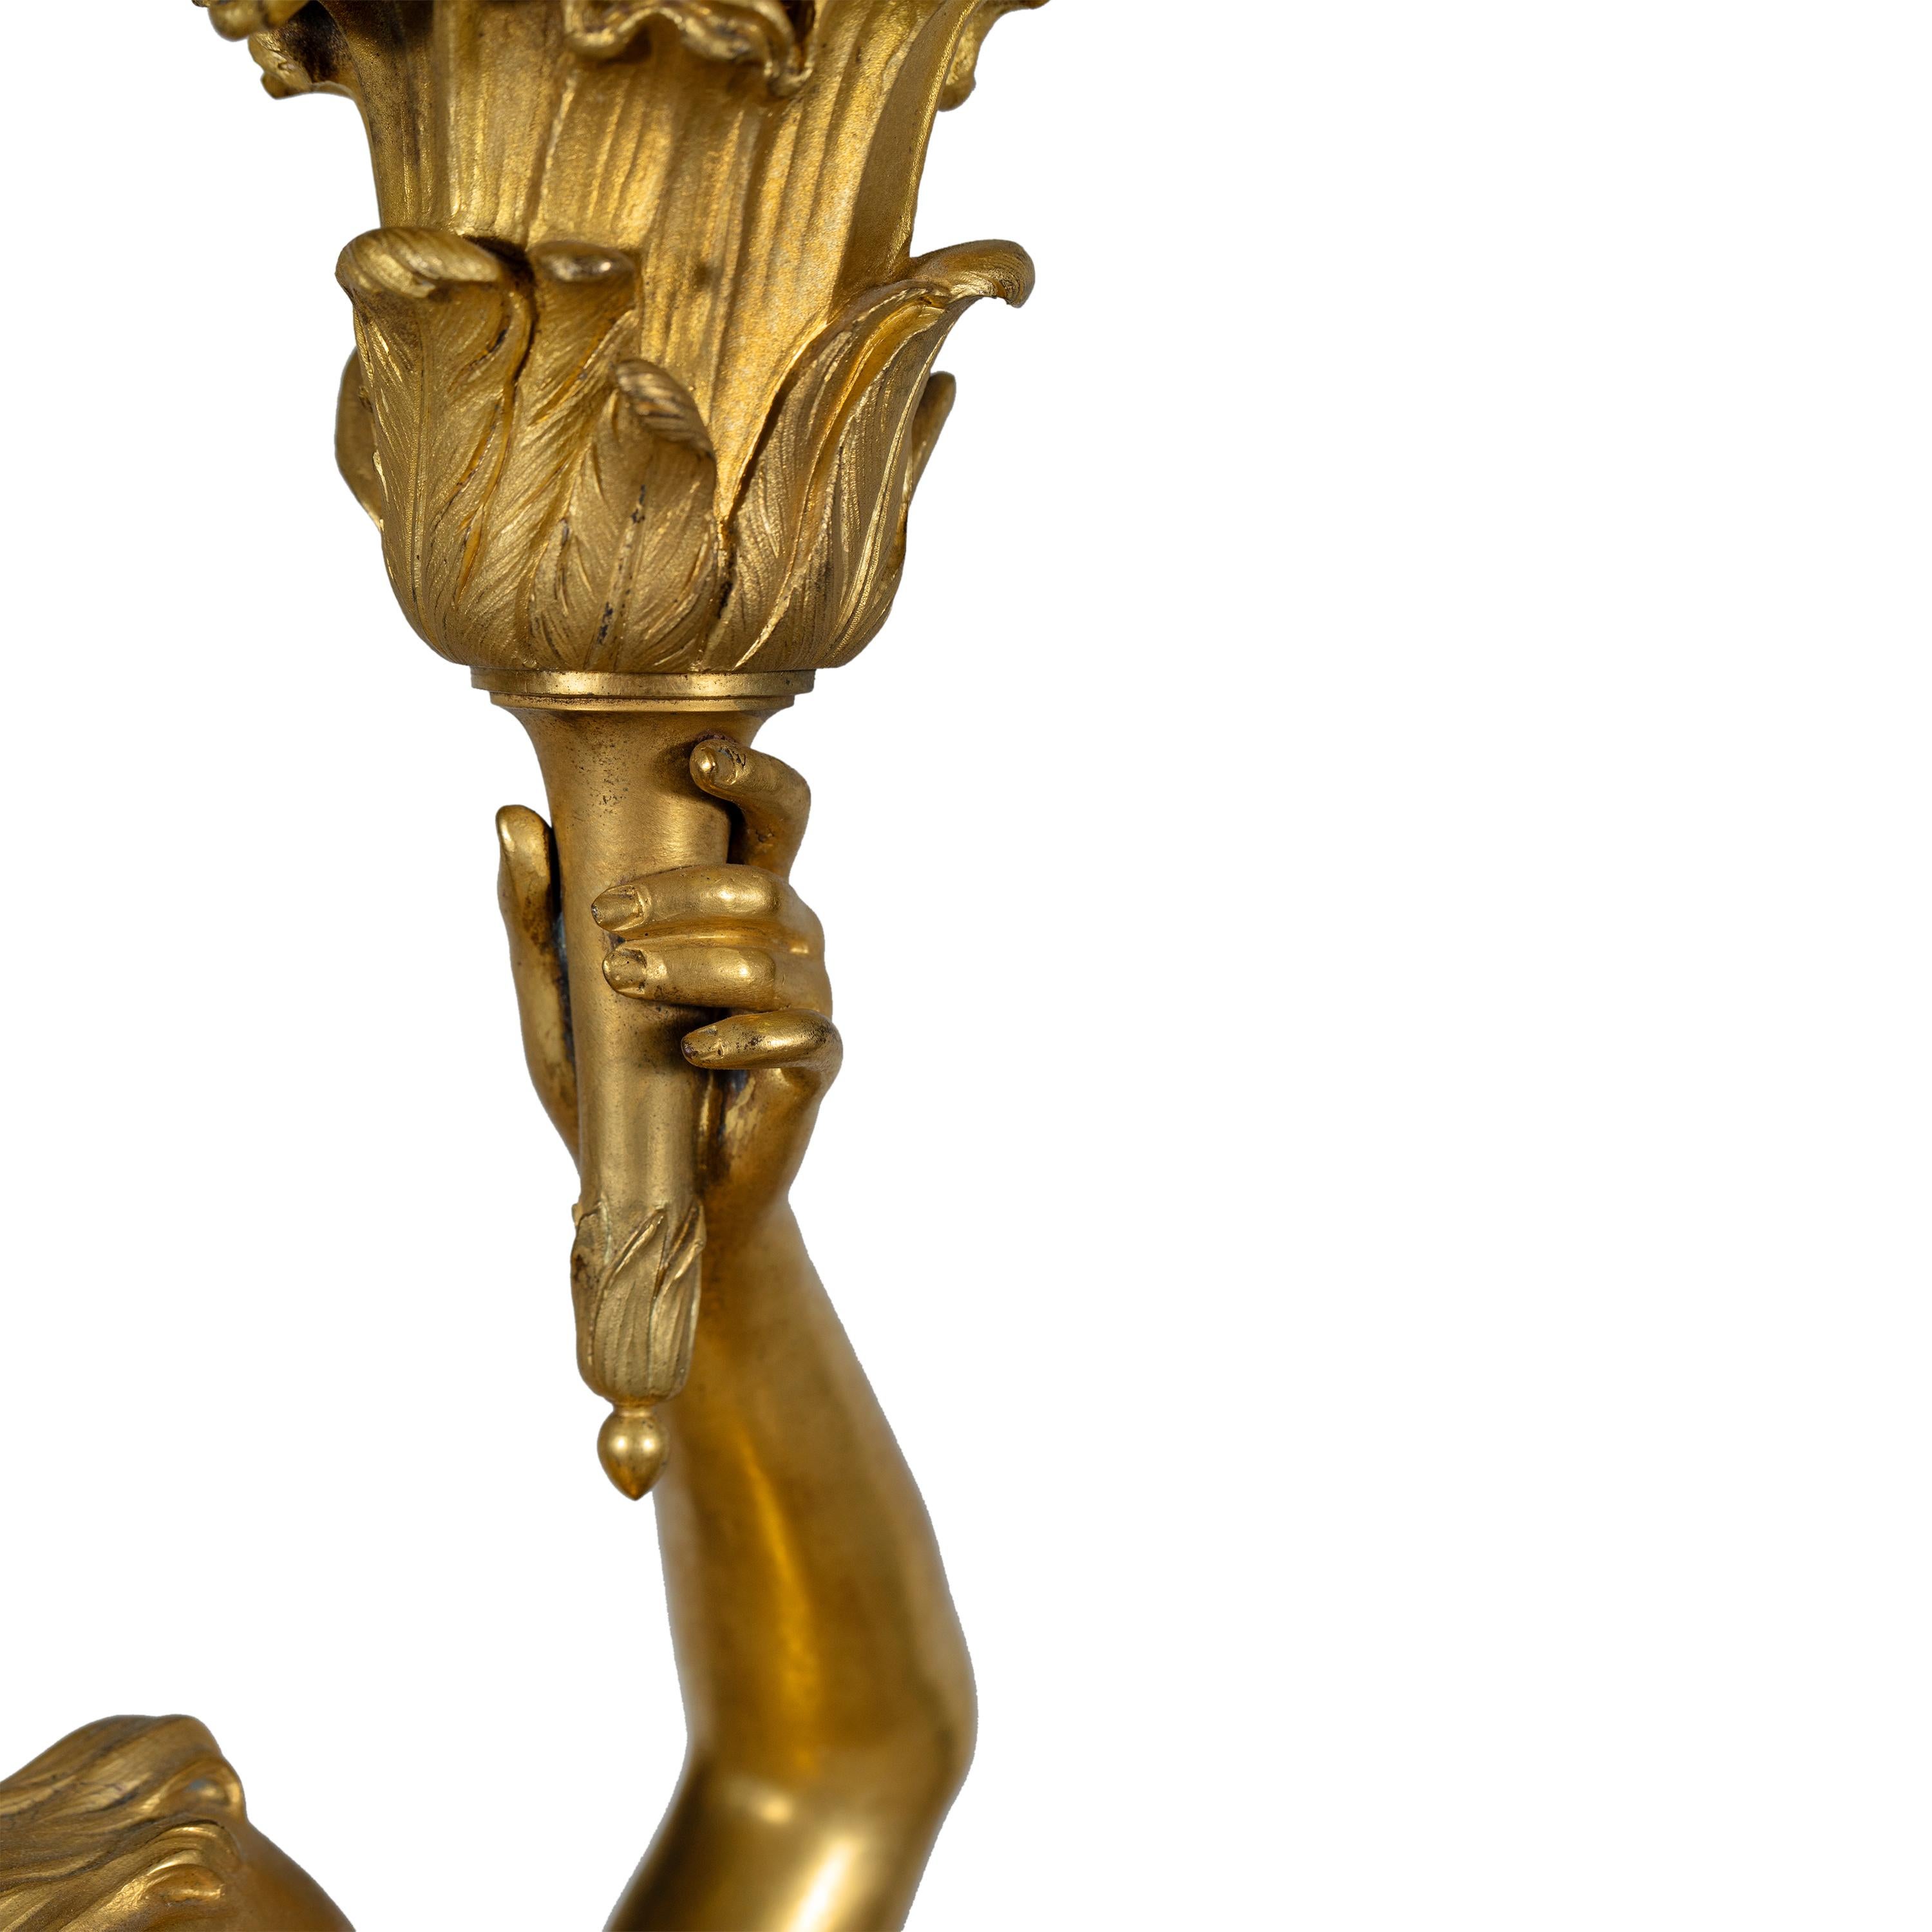 A Large French Gilt-Bronze Centerpiece Candelabra After Clodion, 19th Century For Sale 3